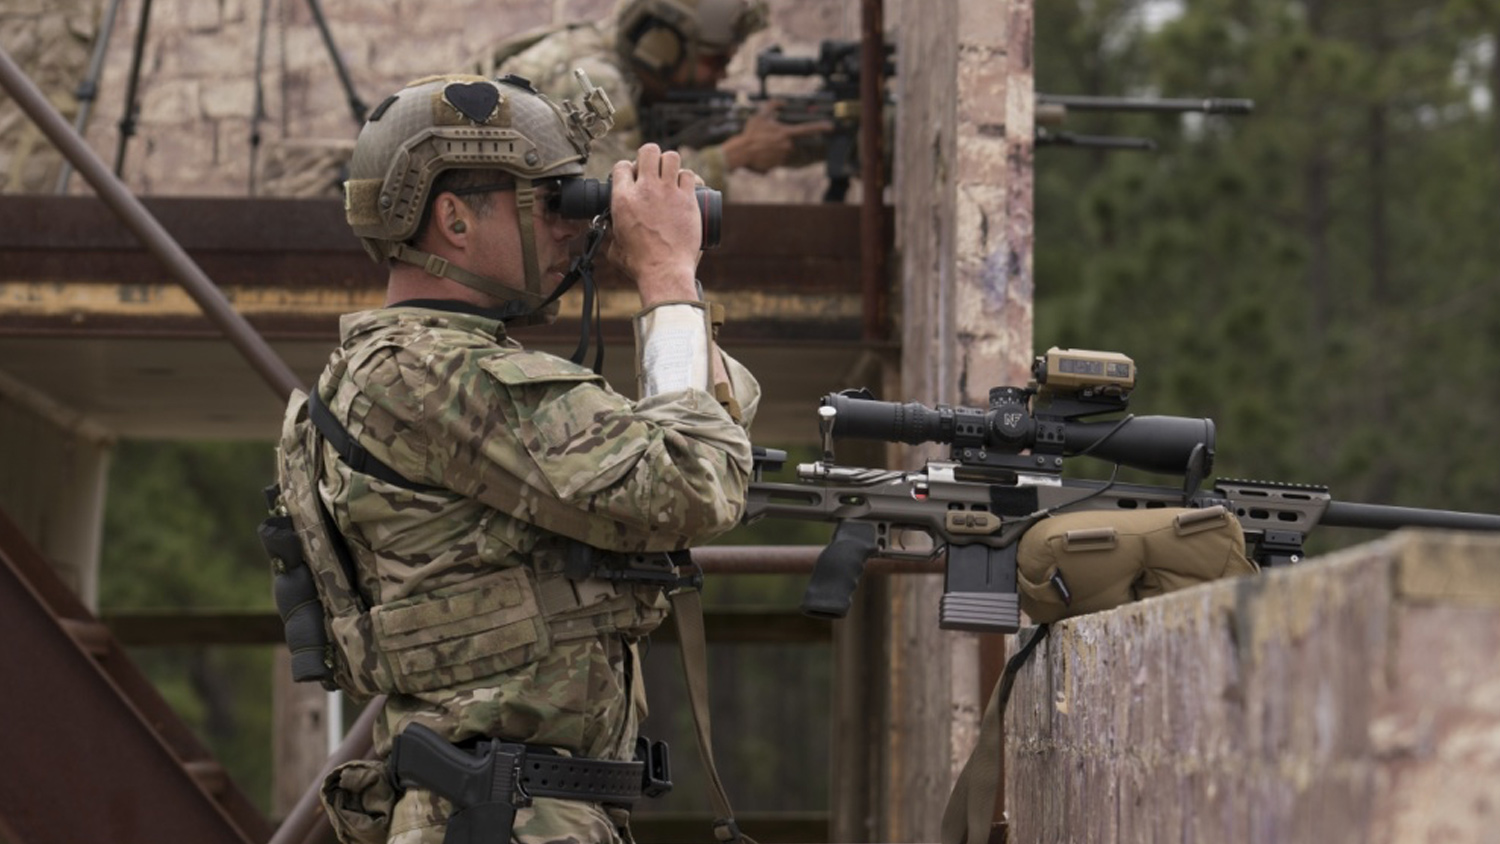 File:2022 USASOC International Sniper Competition Image 1 of 16